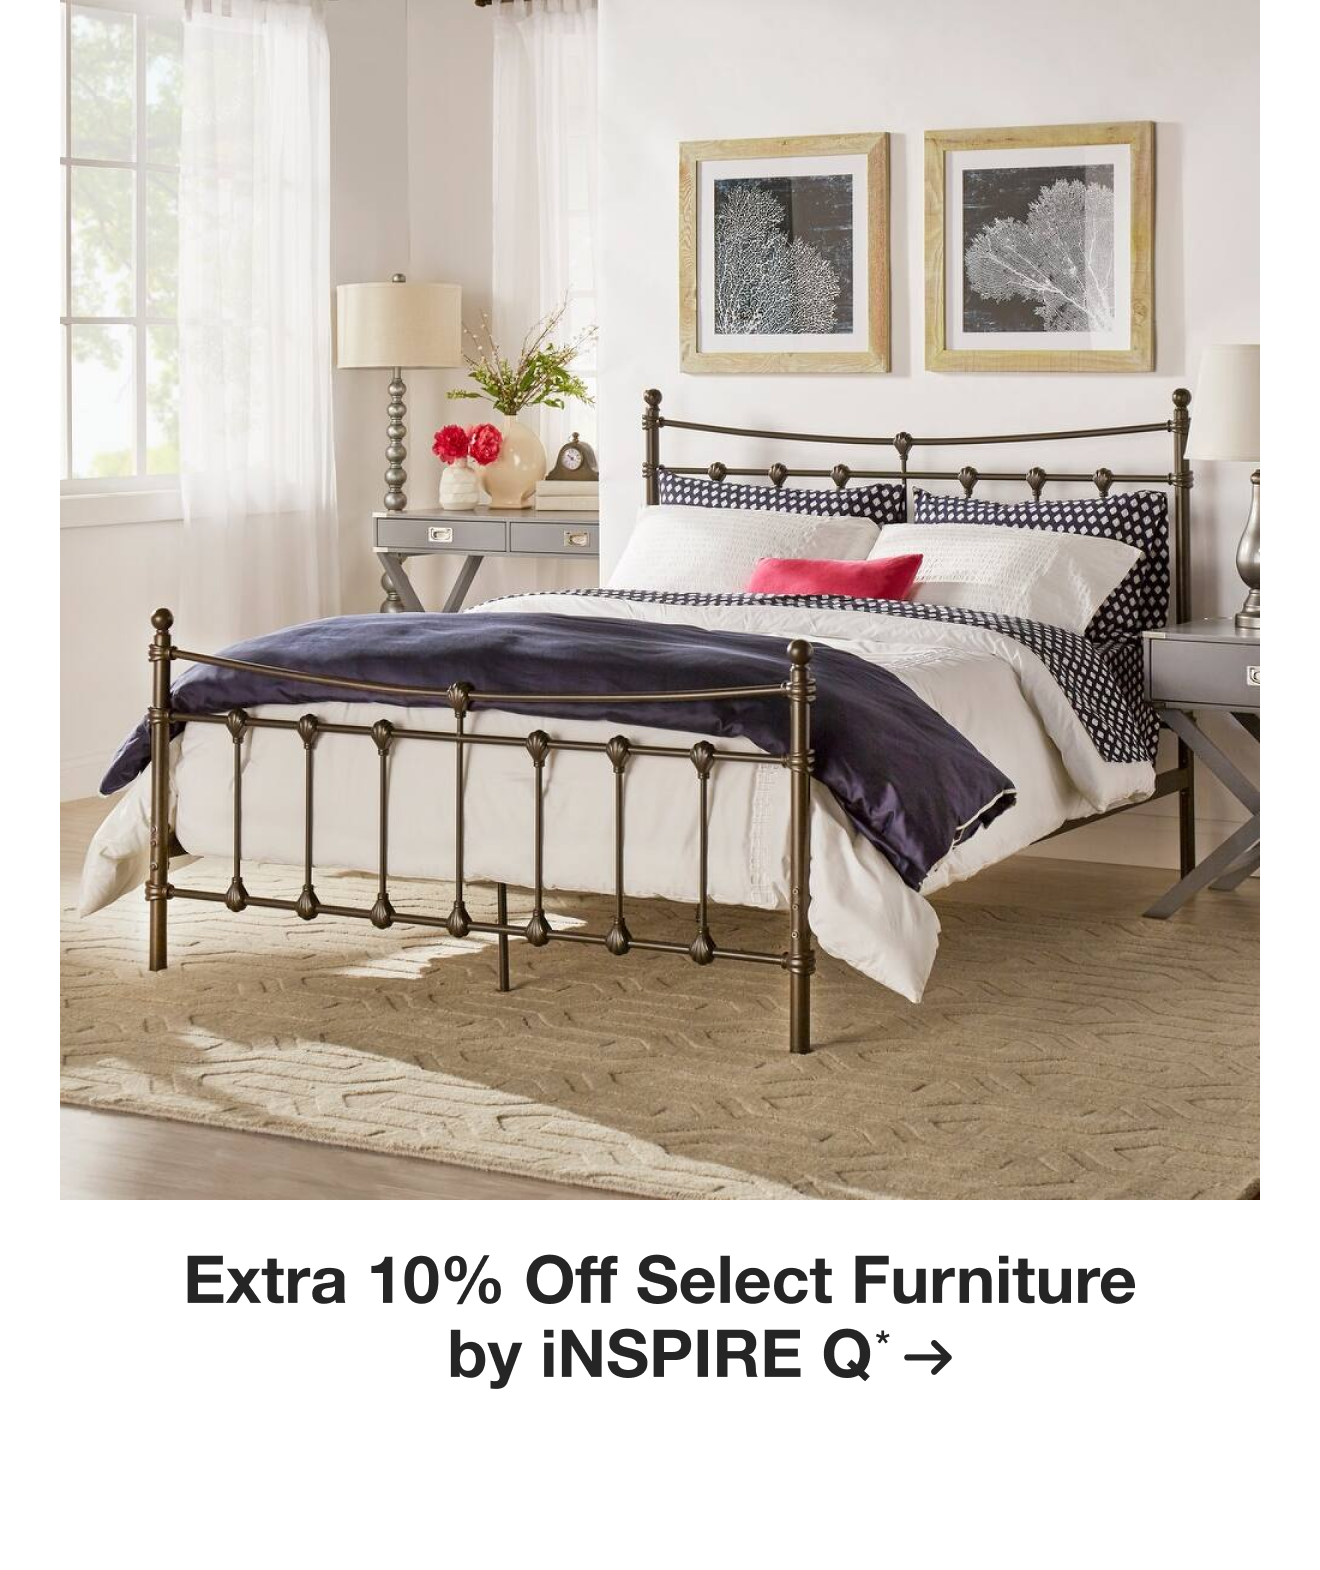 10% off Select Furniture by iNSPIRE Q*